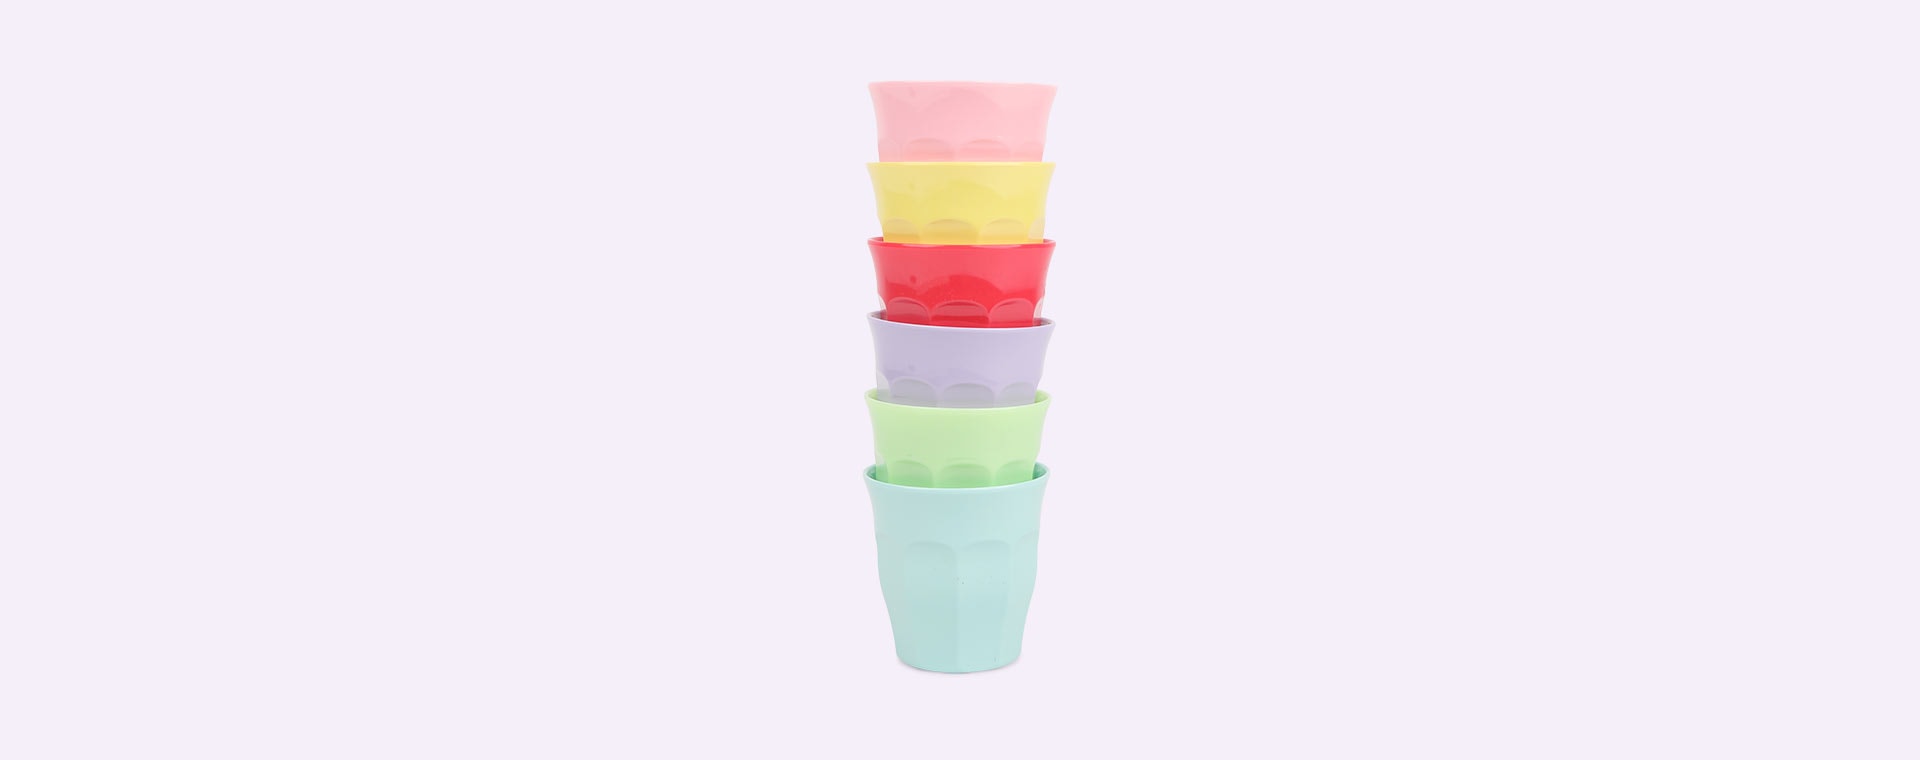 Yippie Yippie Yeah Rice 6-Pack Melamine Mini Cups